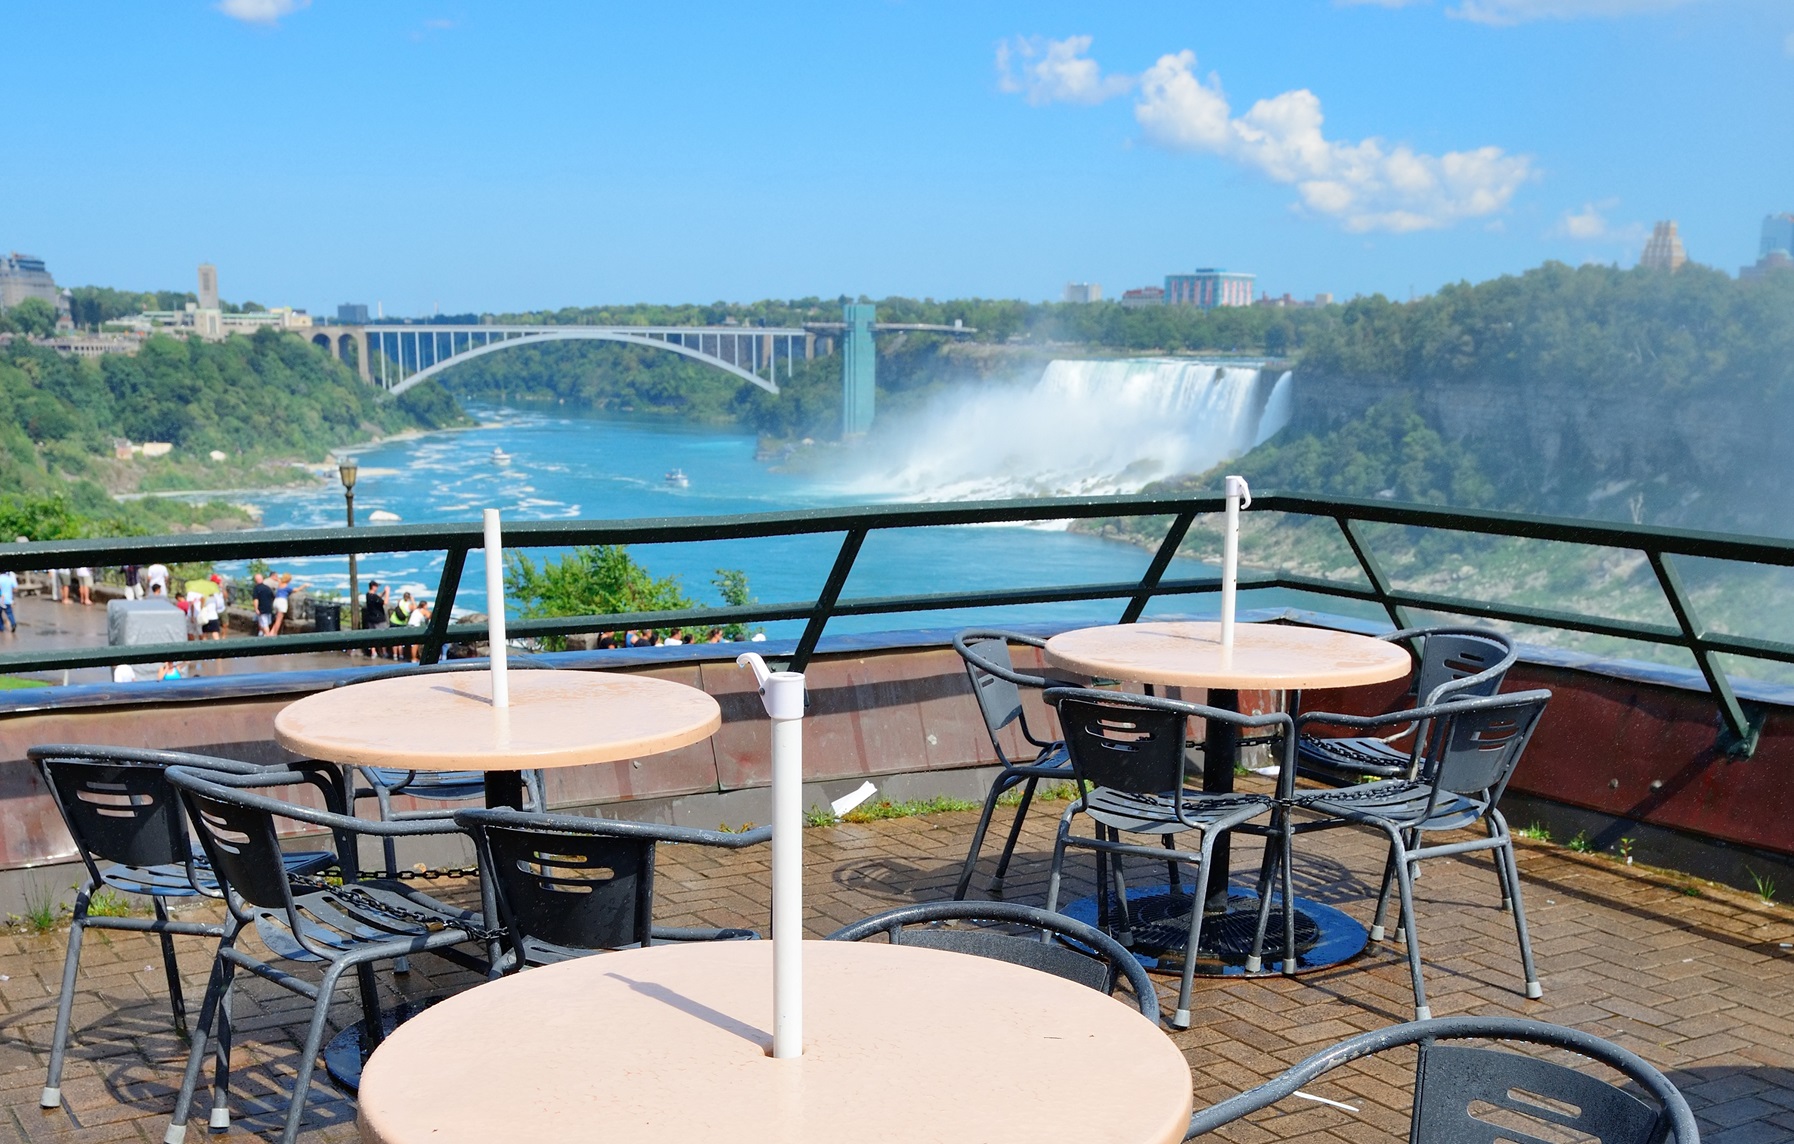 <p>Niagara Falls is one big tourist trap overflowing with kitschy gift shops, haunted houses, and restaurants. The juxtaposition of the stunning falls next to all the <strong>cheesy attractions</strong> does the natural wonder no justice.</p>